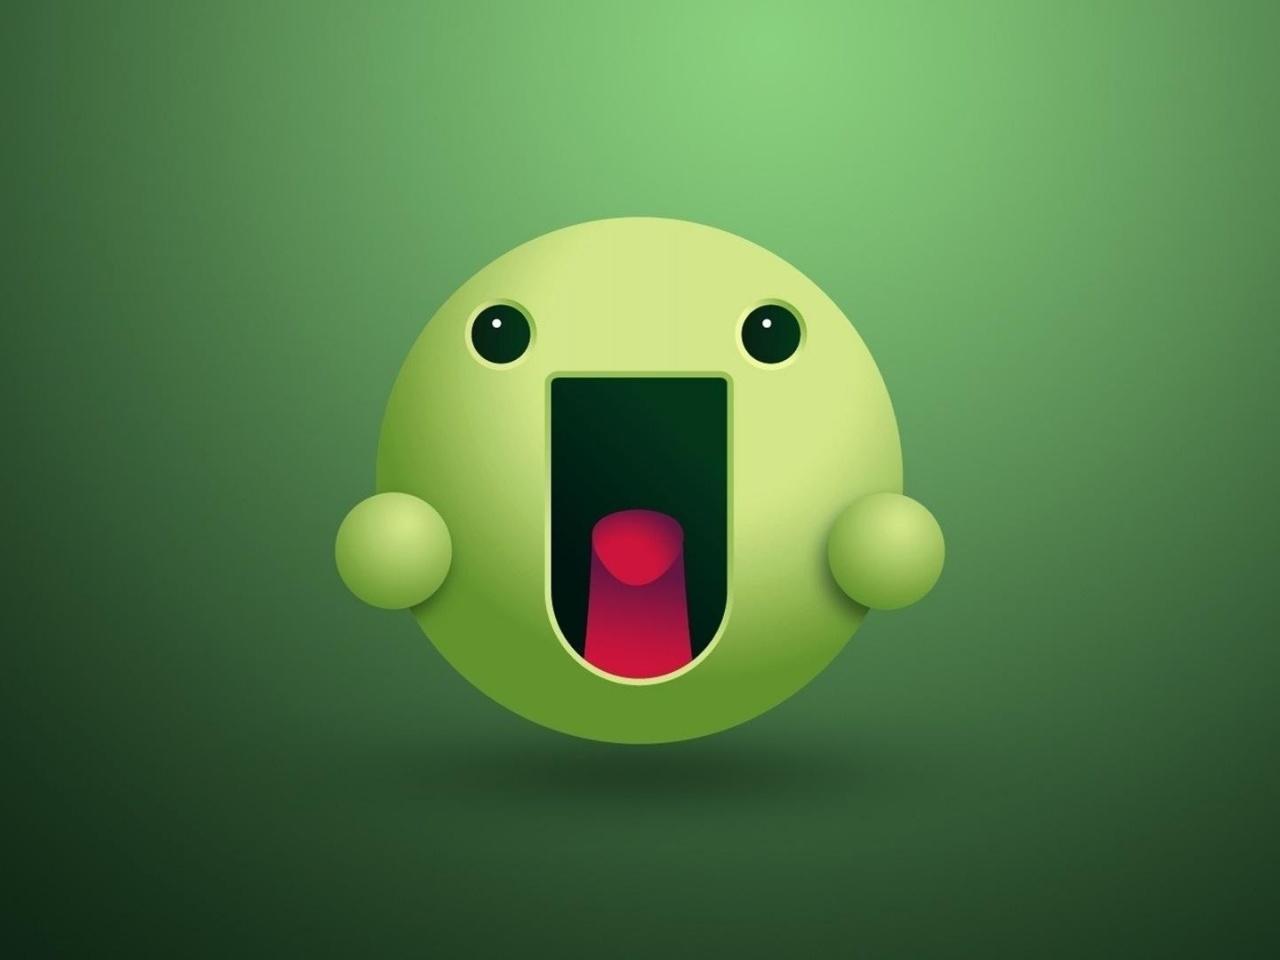 green smiley face wallpapers 37077 1280x960jpg